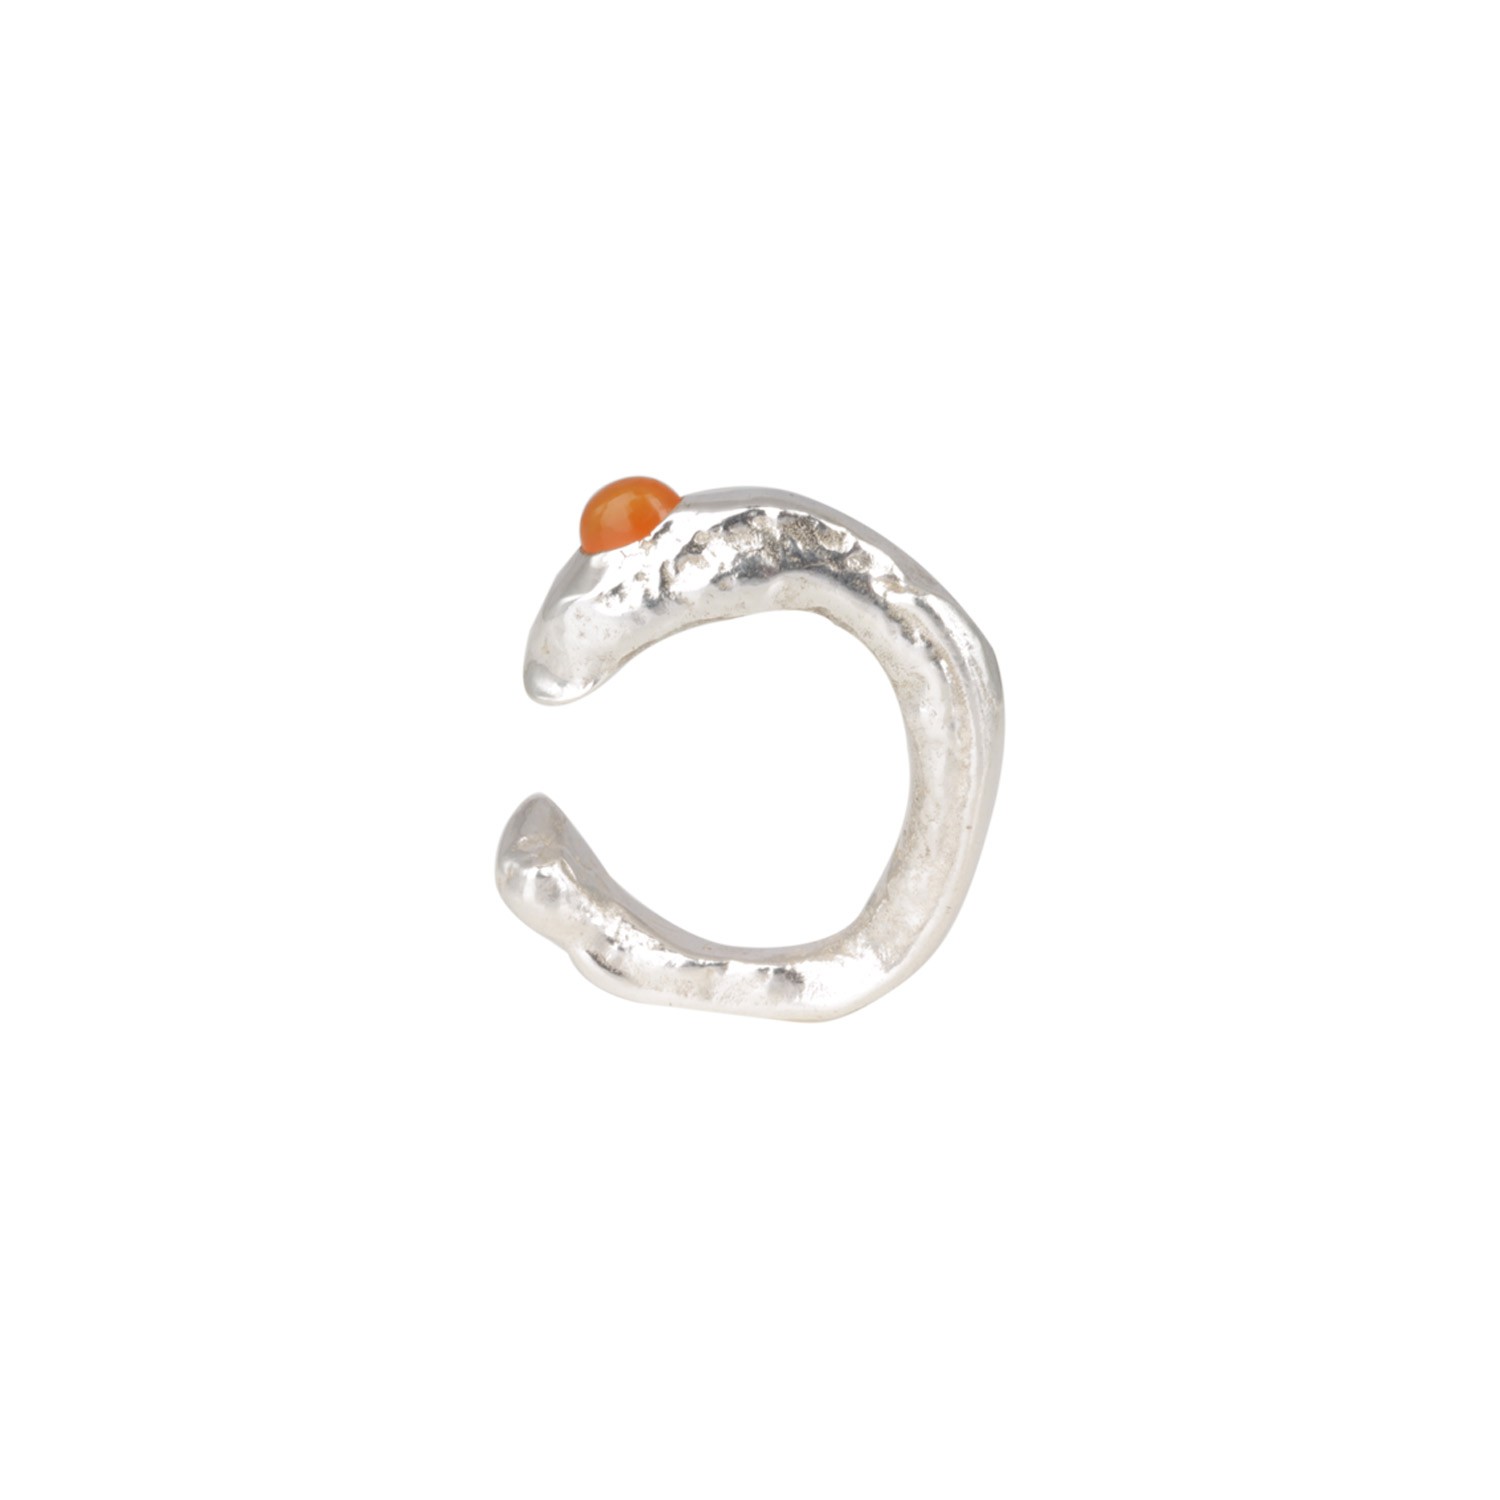 Antique Carnelian Oxidized Silver Textured Ring For Women and Girls